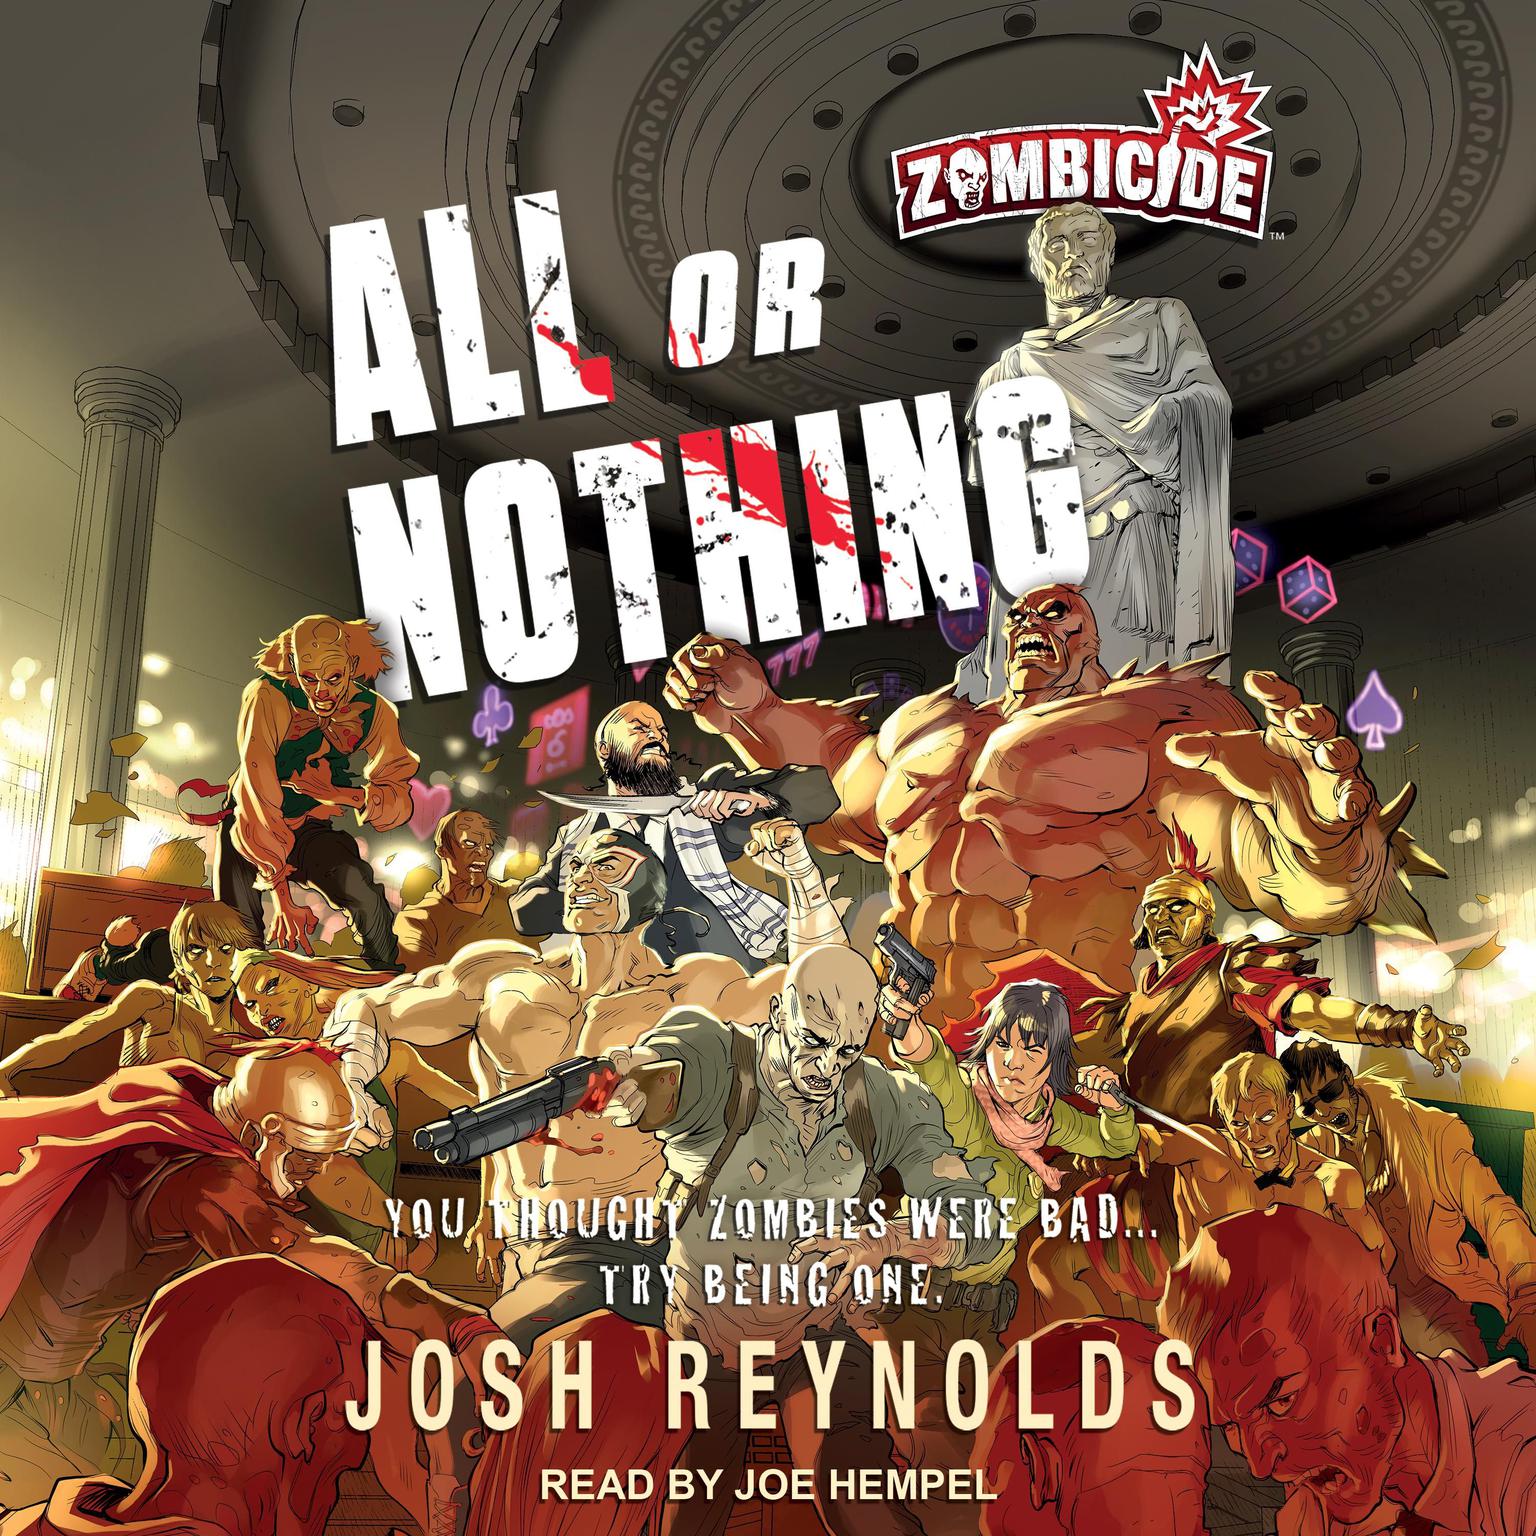 All or Nothing Audiobook, by Josh Reynolds